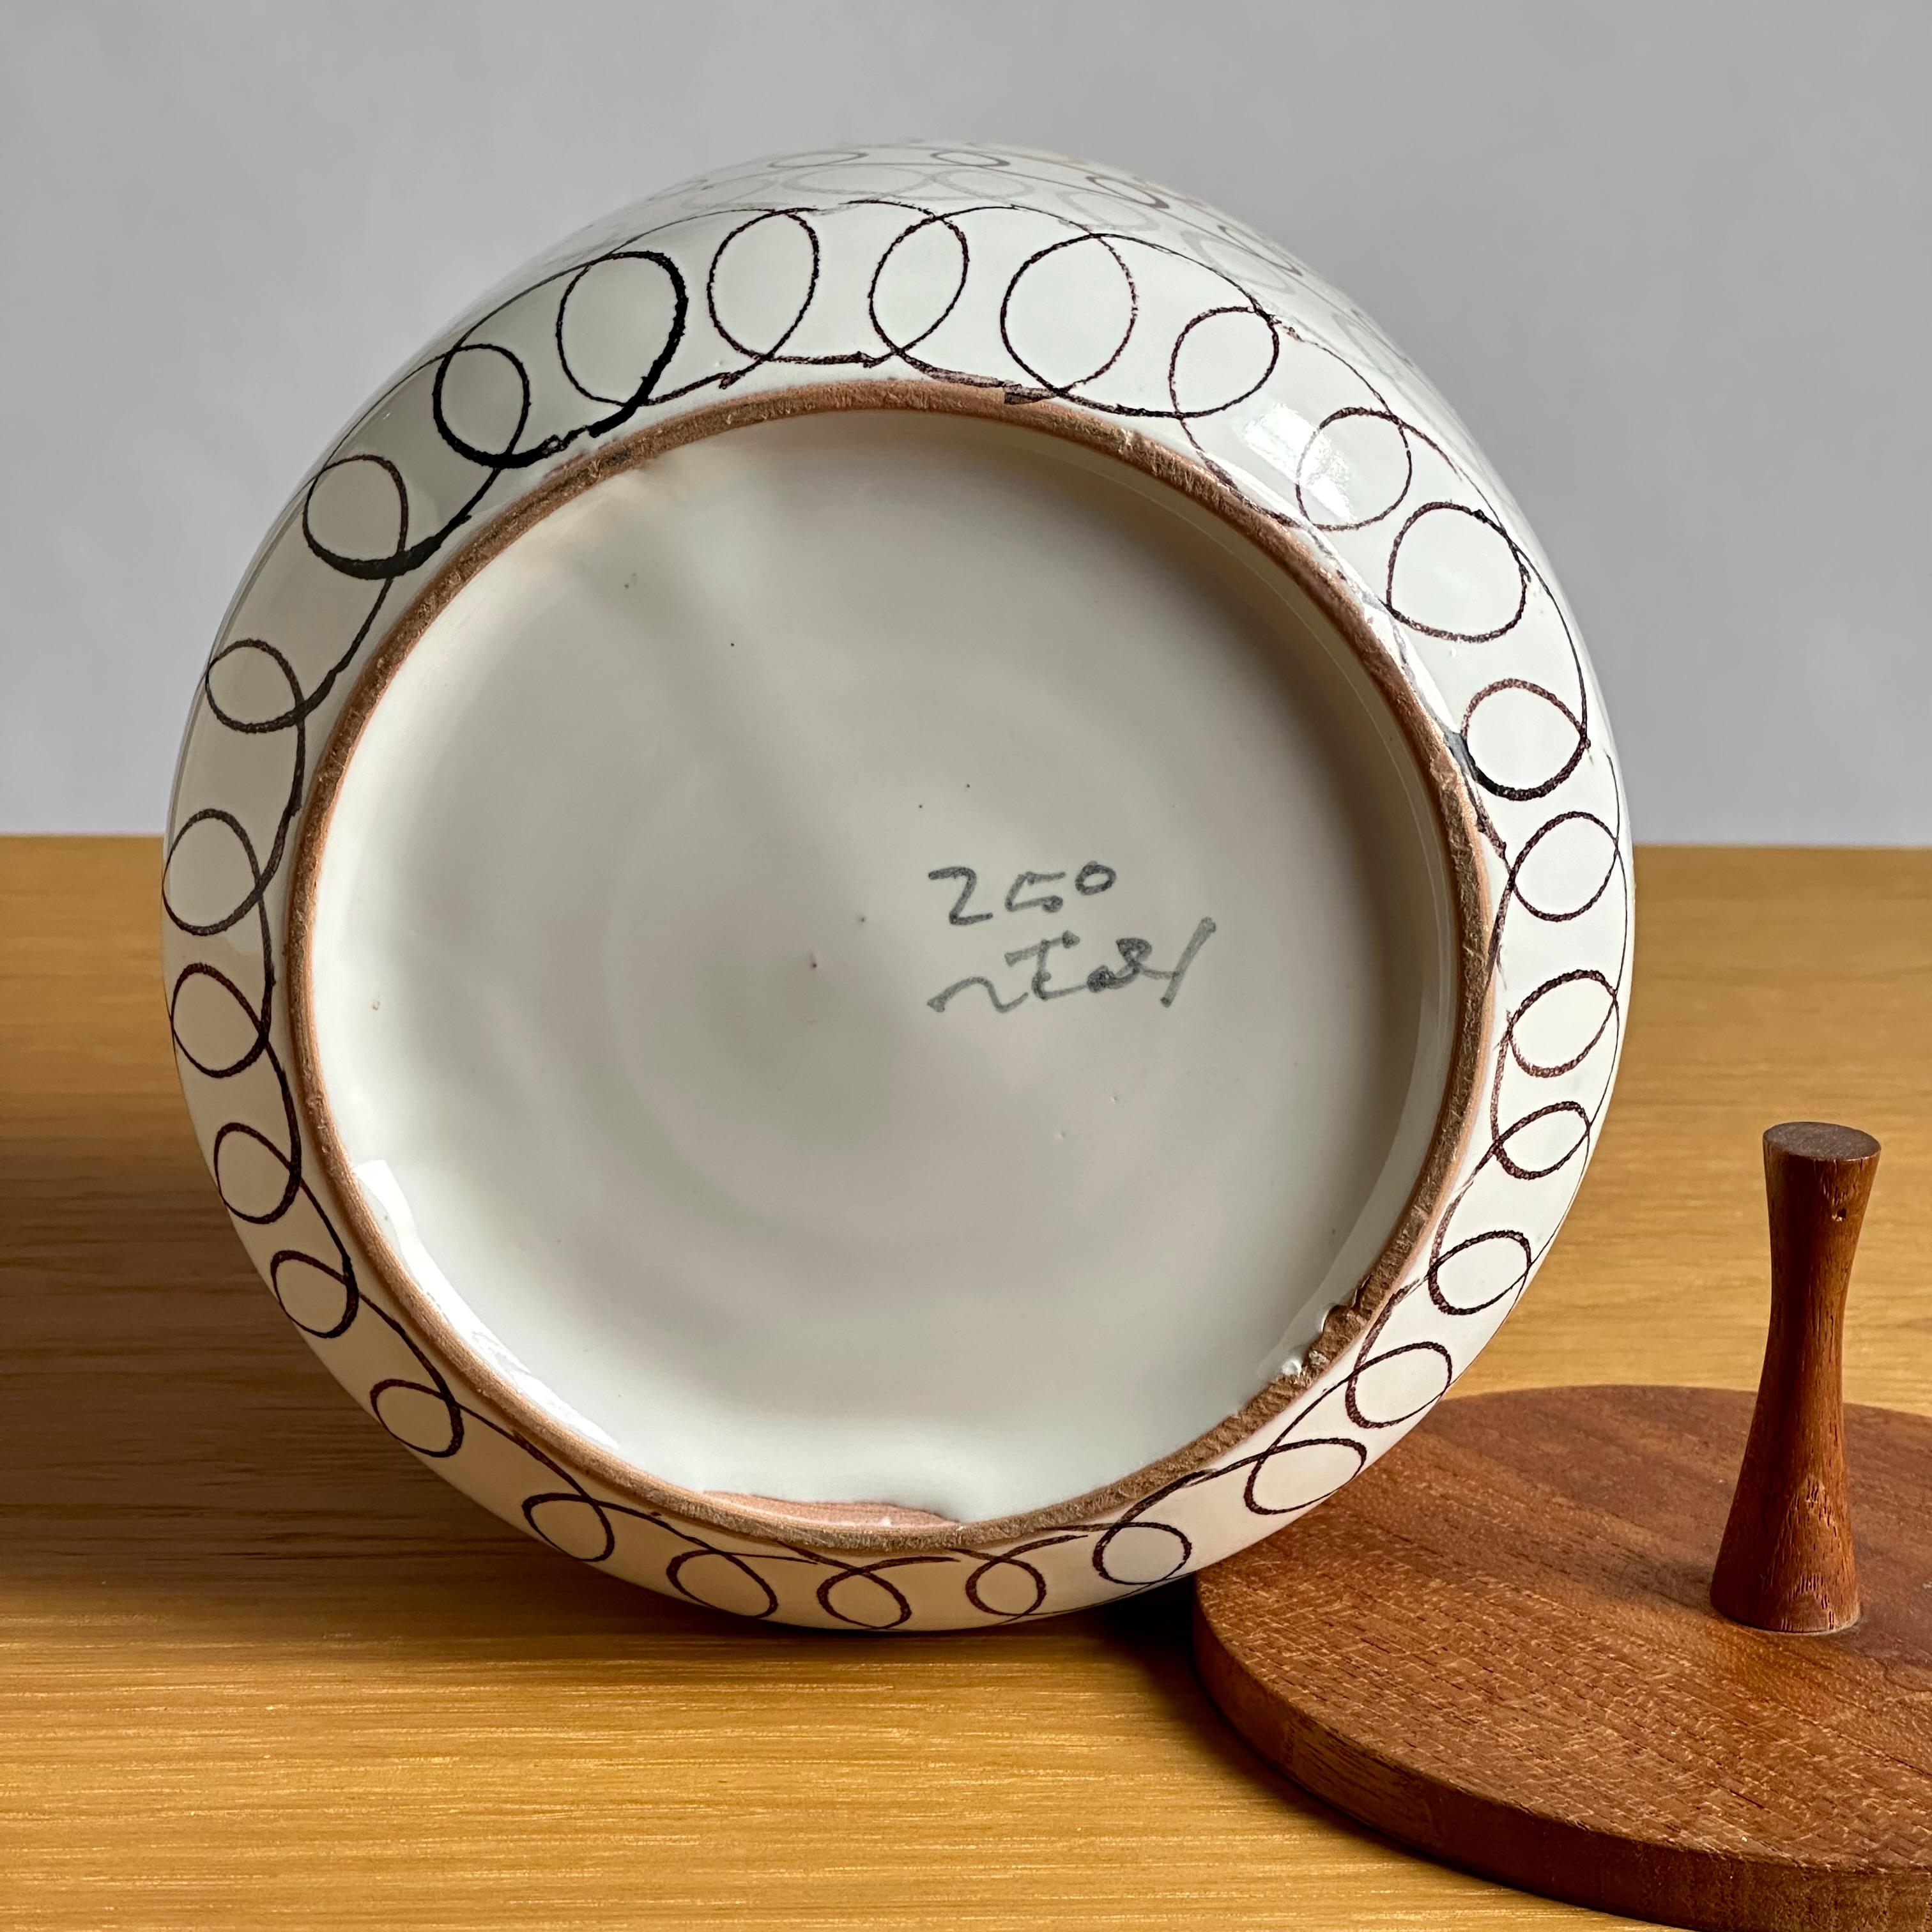 Aldo Londi for Bitossi Ceramic Vessel with Walnut Lid, 1950s In Good Condition For Sale In Brooklyn, NY